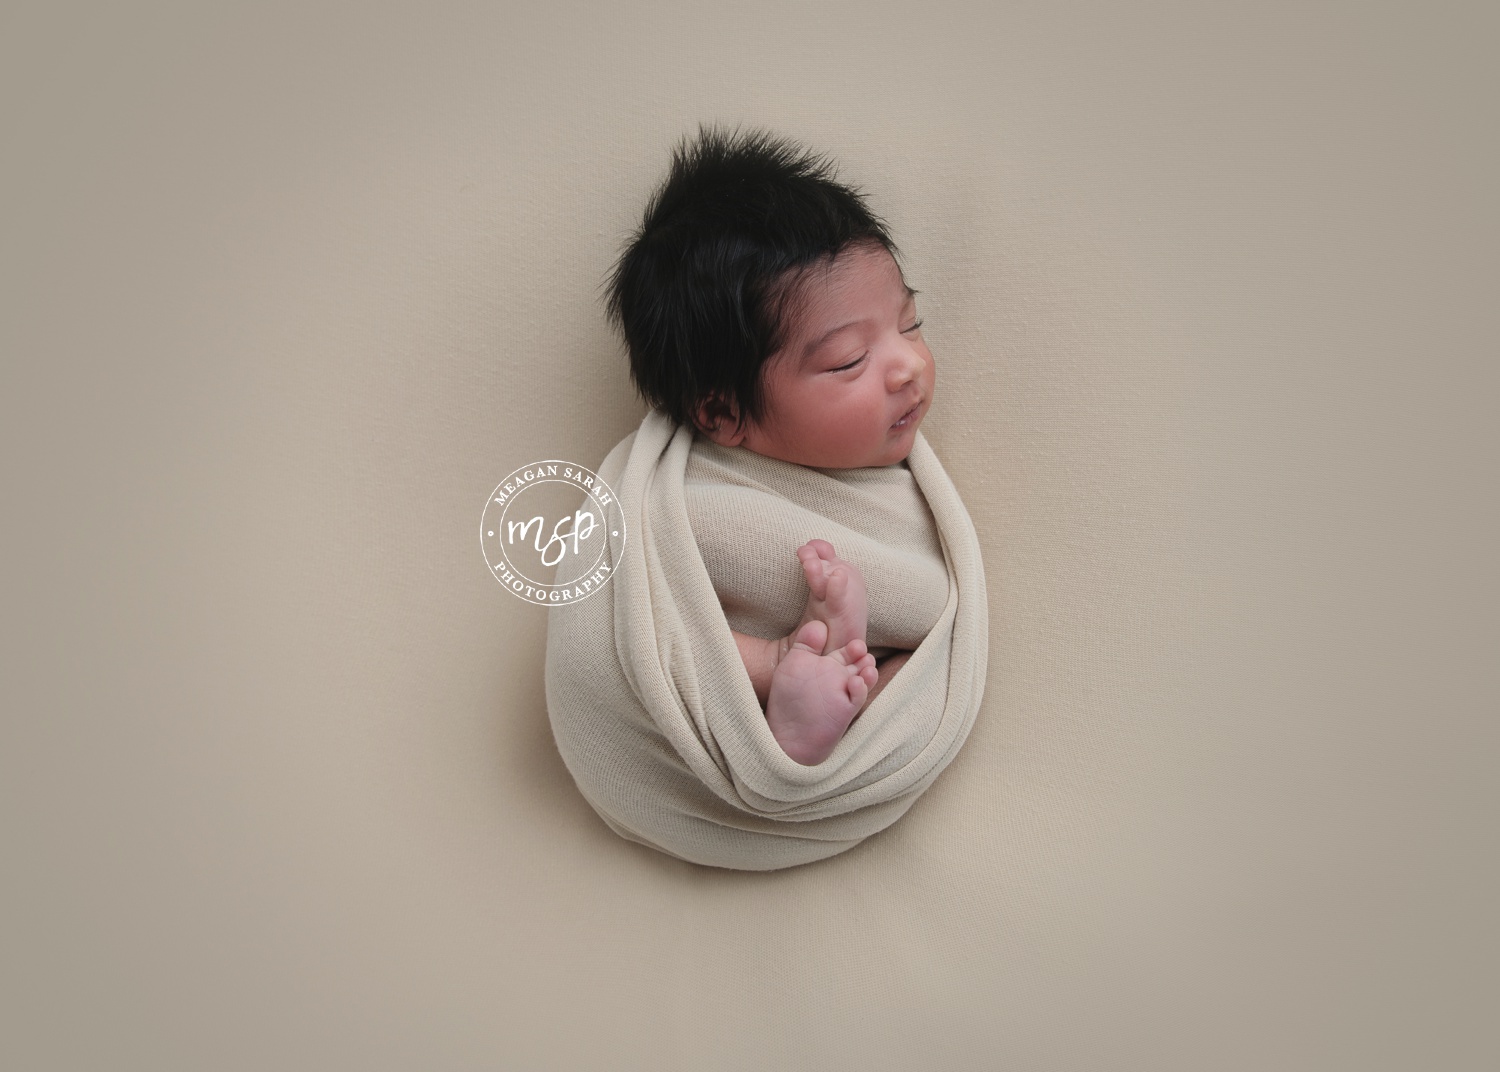 Girl,Beige,Swaddle,Turtle on back,Baby Photographer Leeds,Baby Photography Leeds,Baby Pictures,Cute babies,Leeds Newborn Photographer,Leeds Newborn Photography,Leeds Photographer,Little Ones,Meagan Sarah Photography,Newborn Photography,Professional Photographer in Leeds,West Yorkshire Photographer,Yorkshire Newborn Photographer,Yorkshire Newborn Photography,